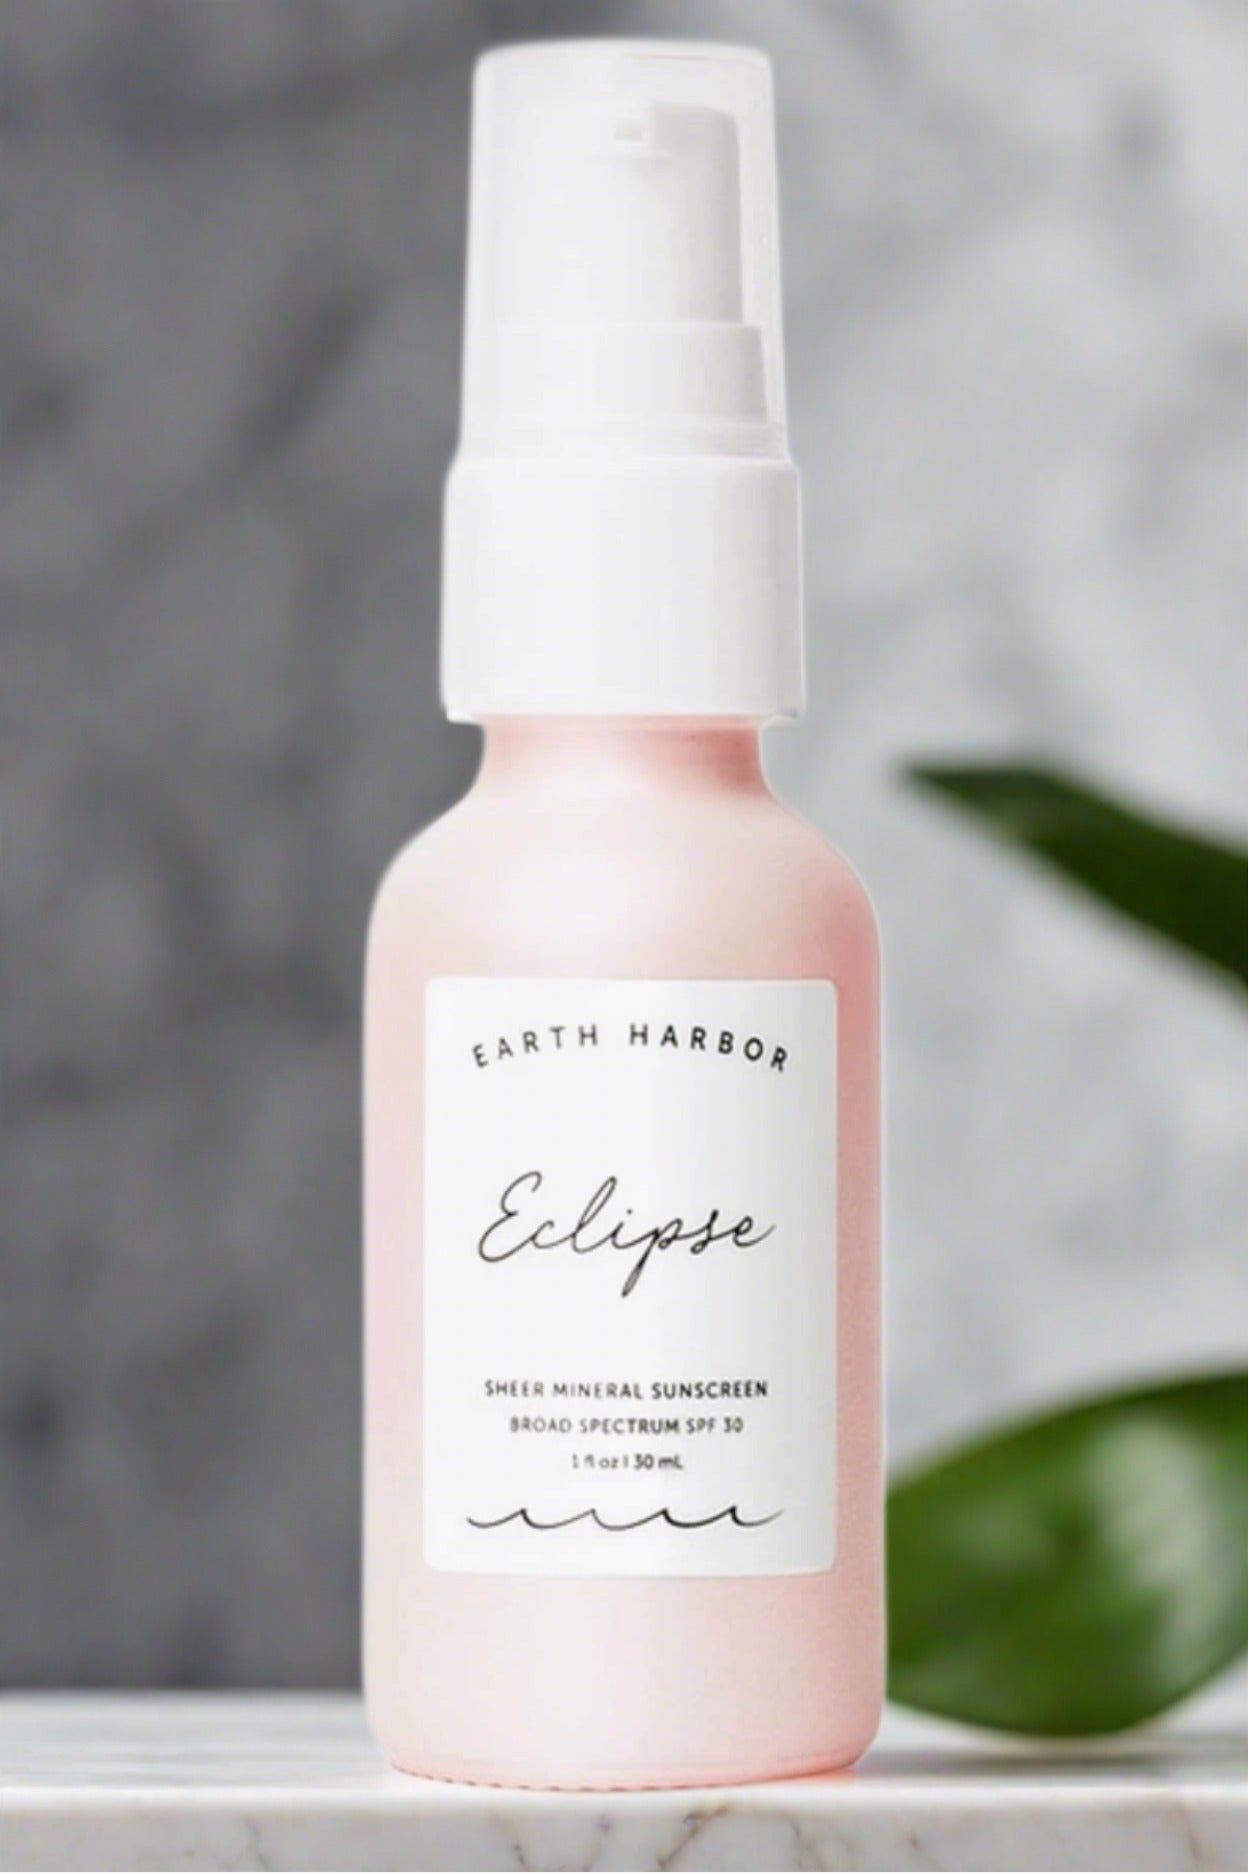 a bottle of Earth Harbor Eclipse sunscreen